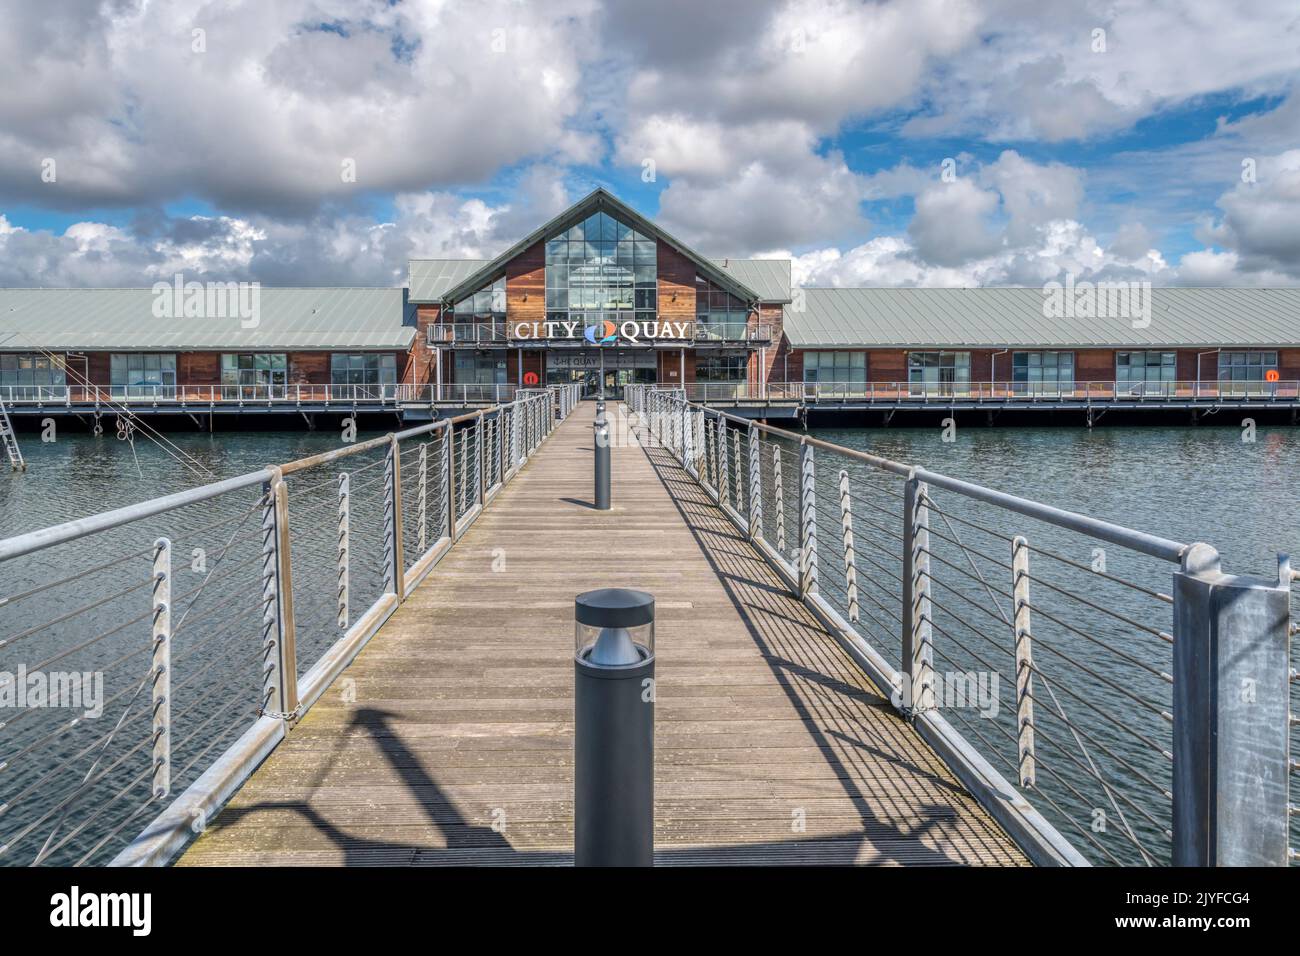 City Quay is a retail, leisure and hotel development around the former Victoria Quay in Dundee. Stock Photo